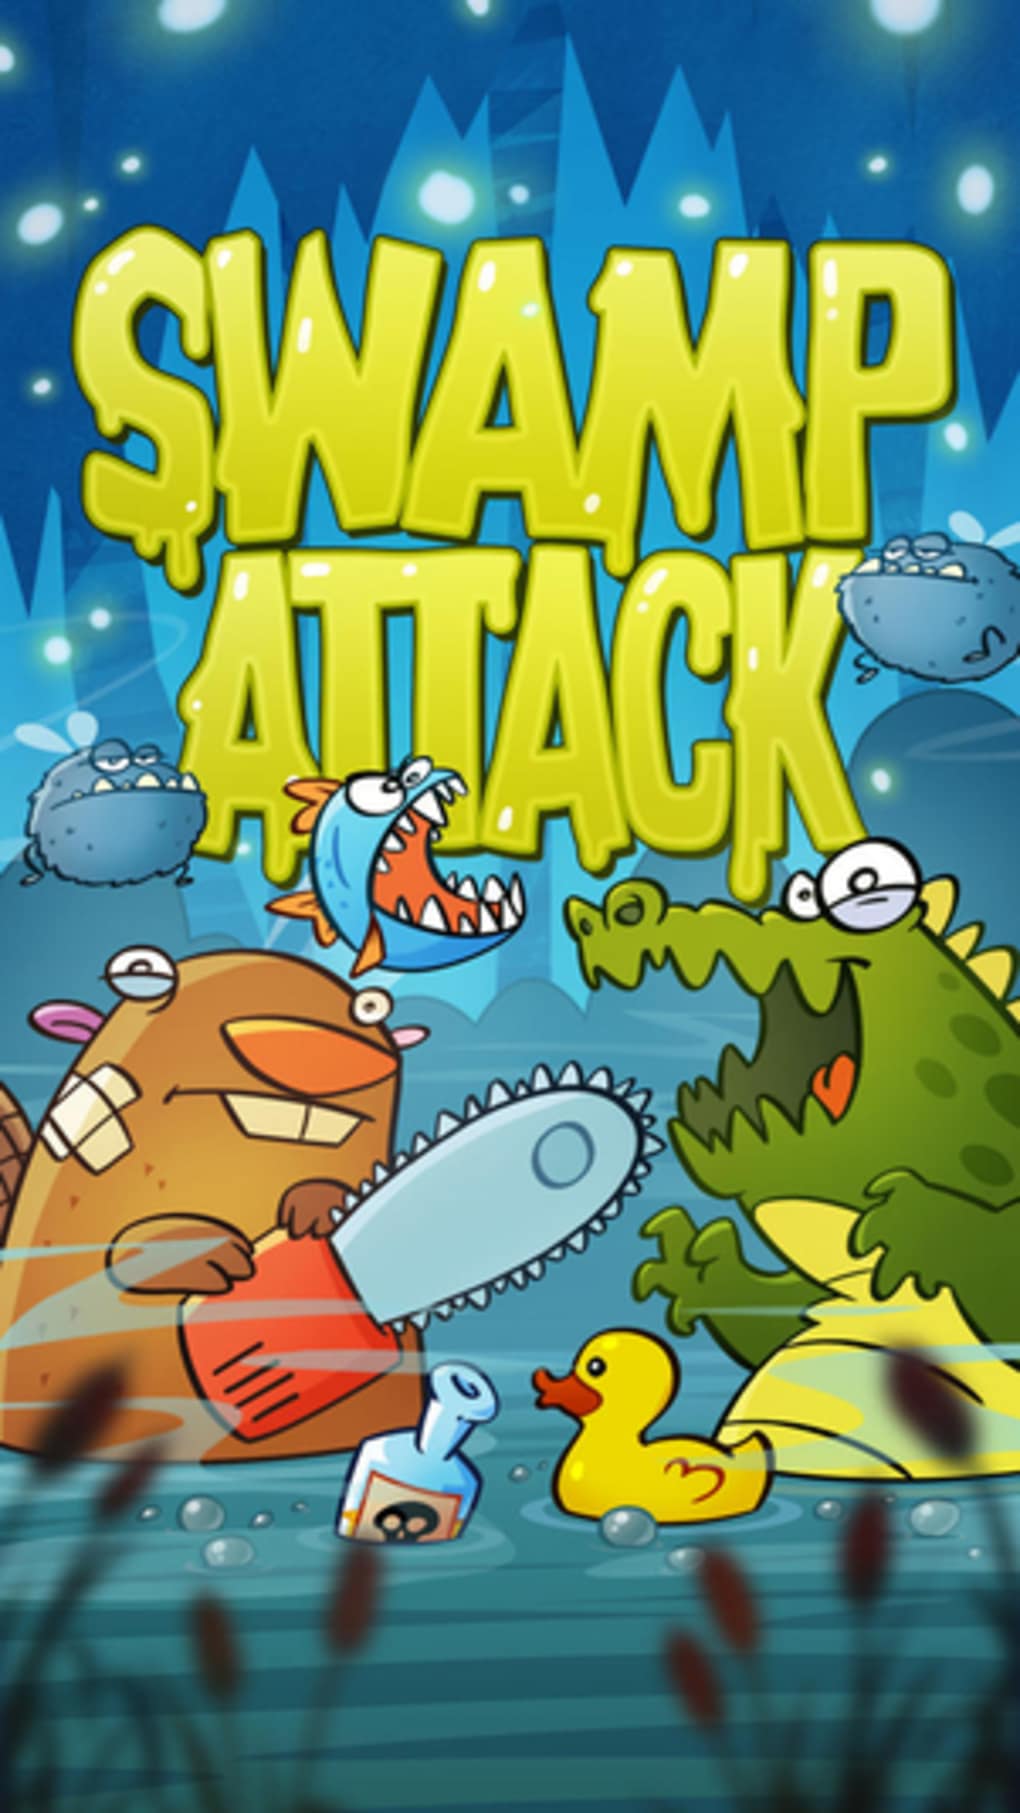 for iphone download Swamp Attack 2